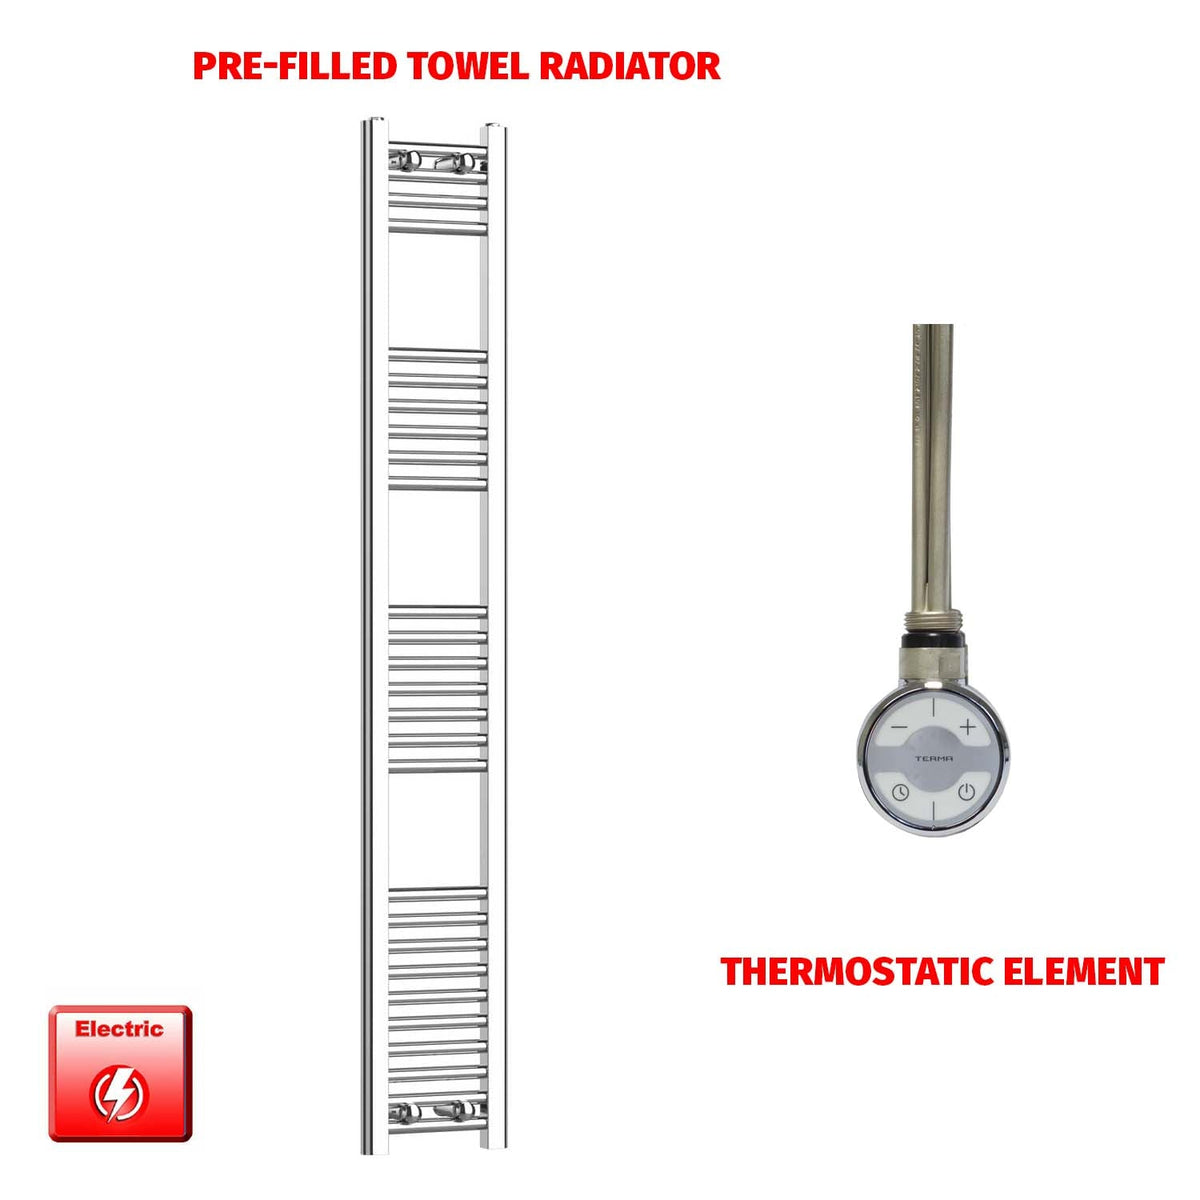 1600mm High 250mm Wide Pre-Filled Electric Heated Towel Radiator Straight Chrome MOA Element No Timer